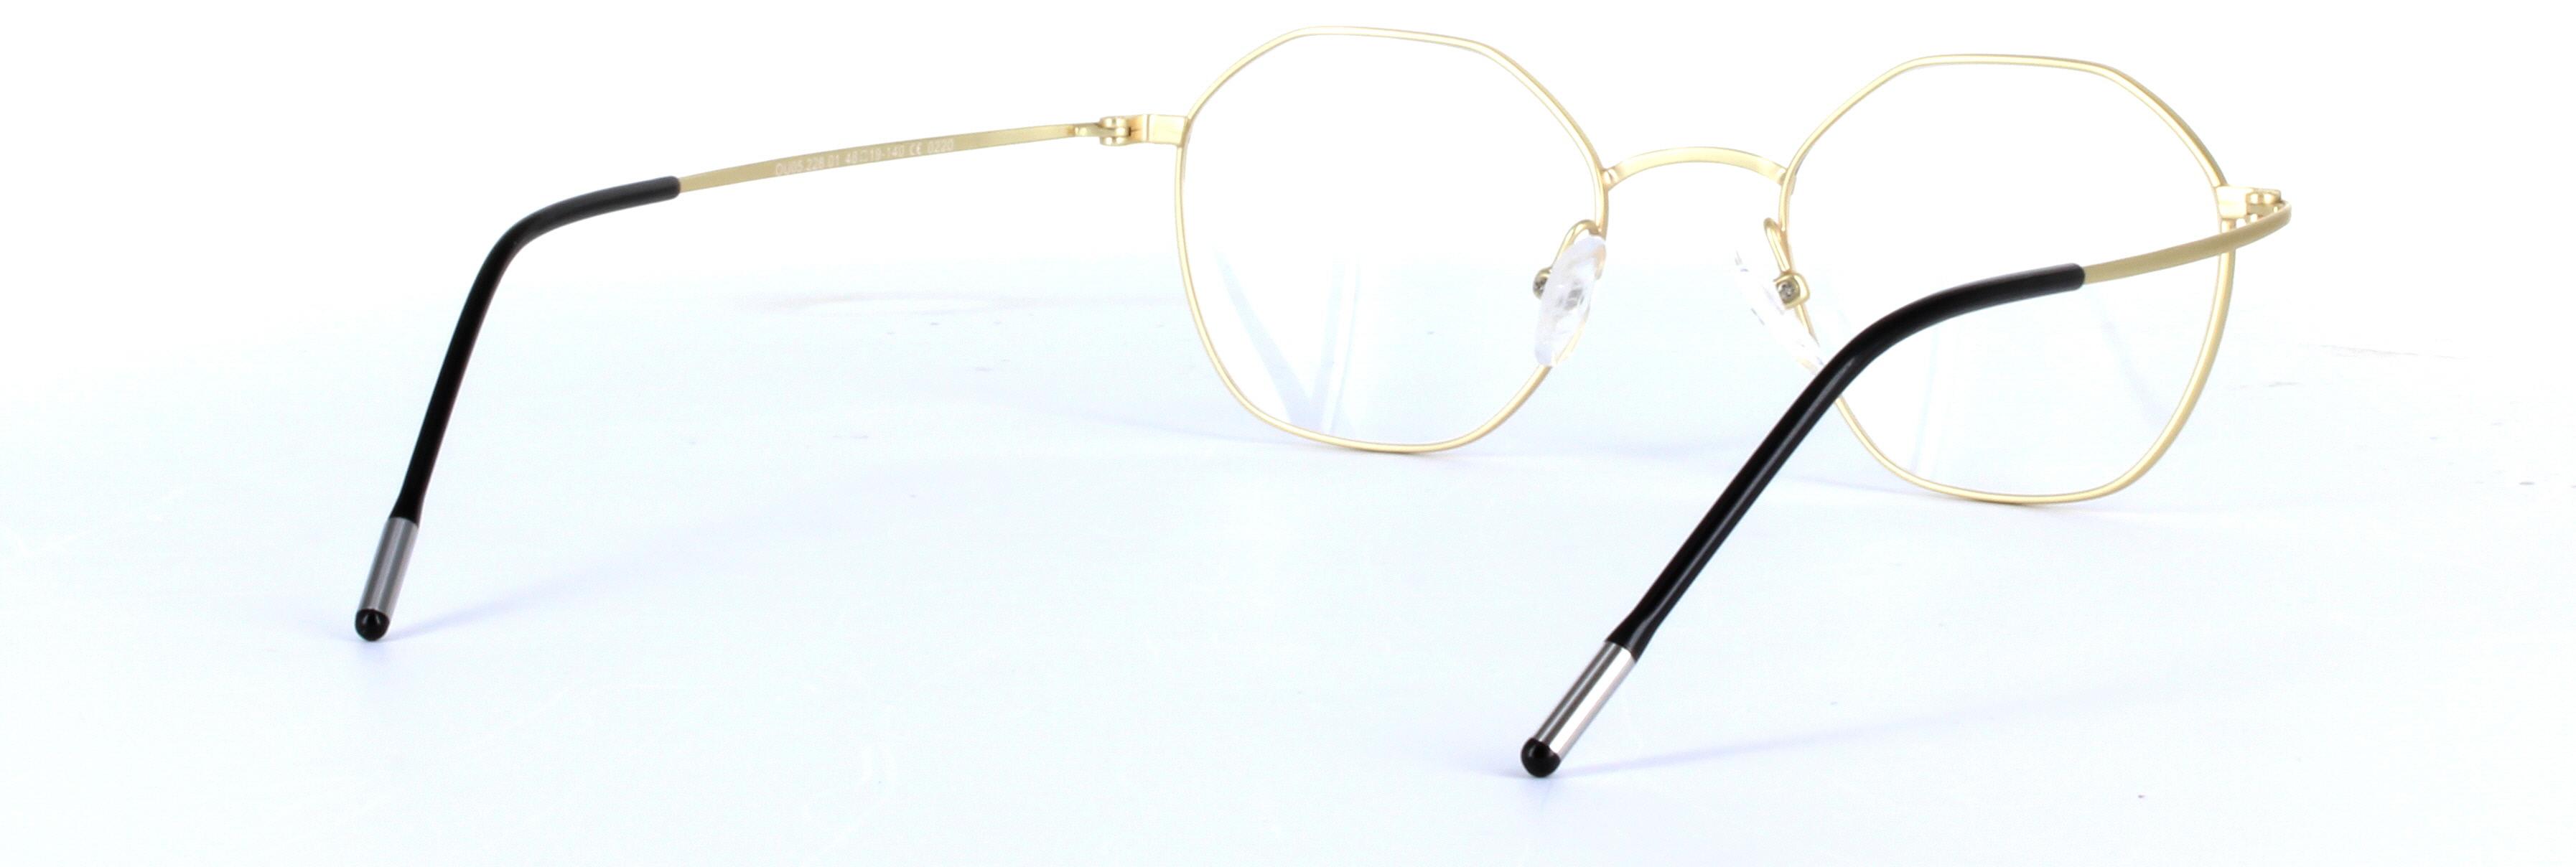 Maiver Gold and Black Full Rim Round Metal Glasses - Image View 4